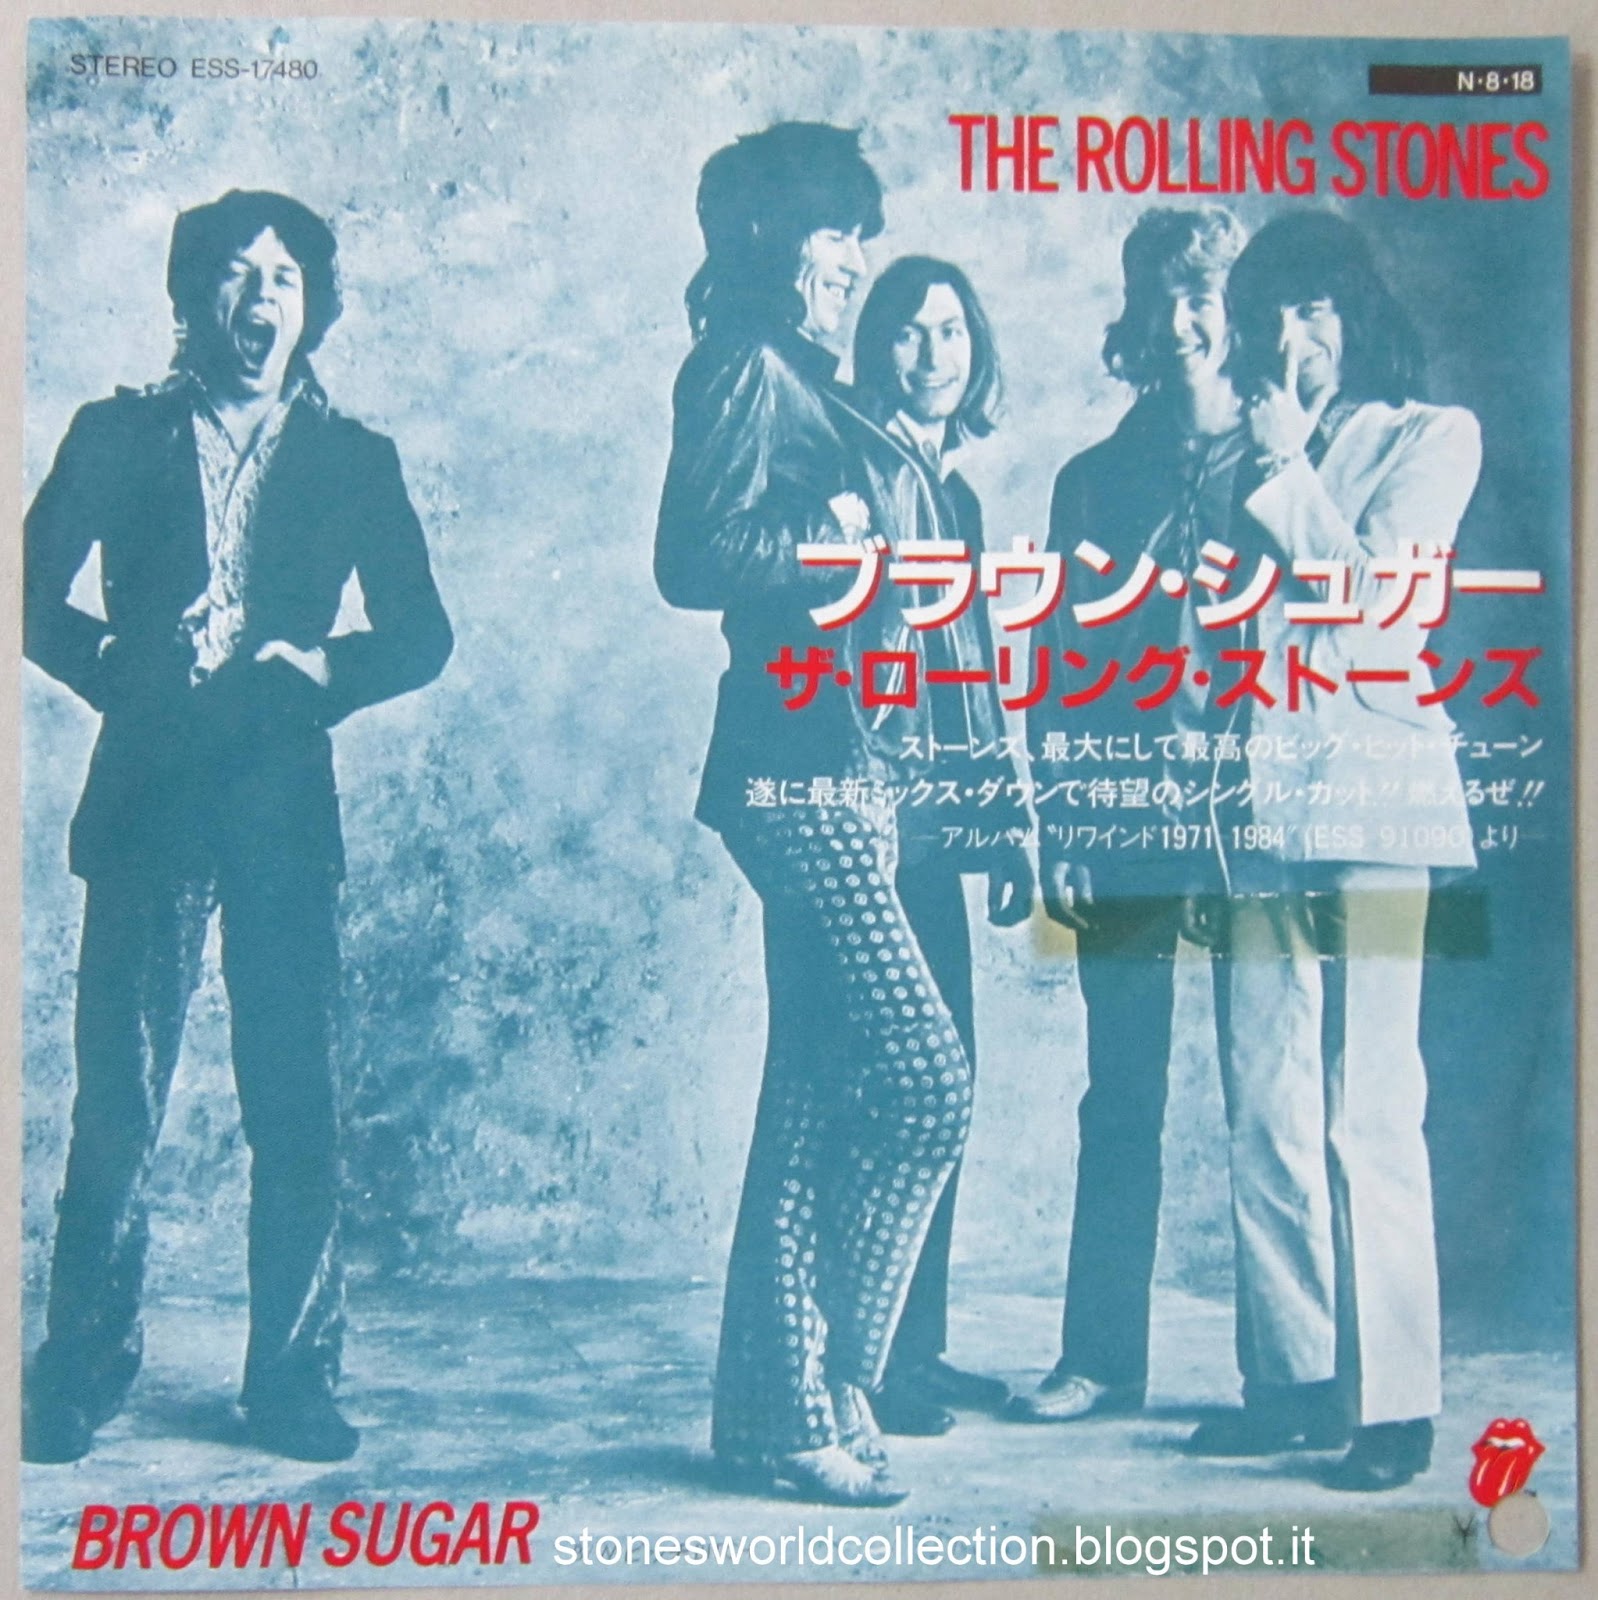 Rolling stones song stoned. Роллинг стоунз 1968. Синглы Роллинг стоунз. Singles 1968-1971 the Rolling Stones. Обложка Роллинг стоунз Браун Шуга.